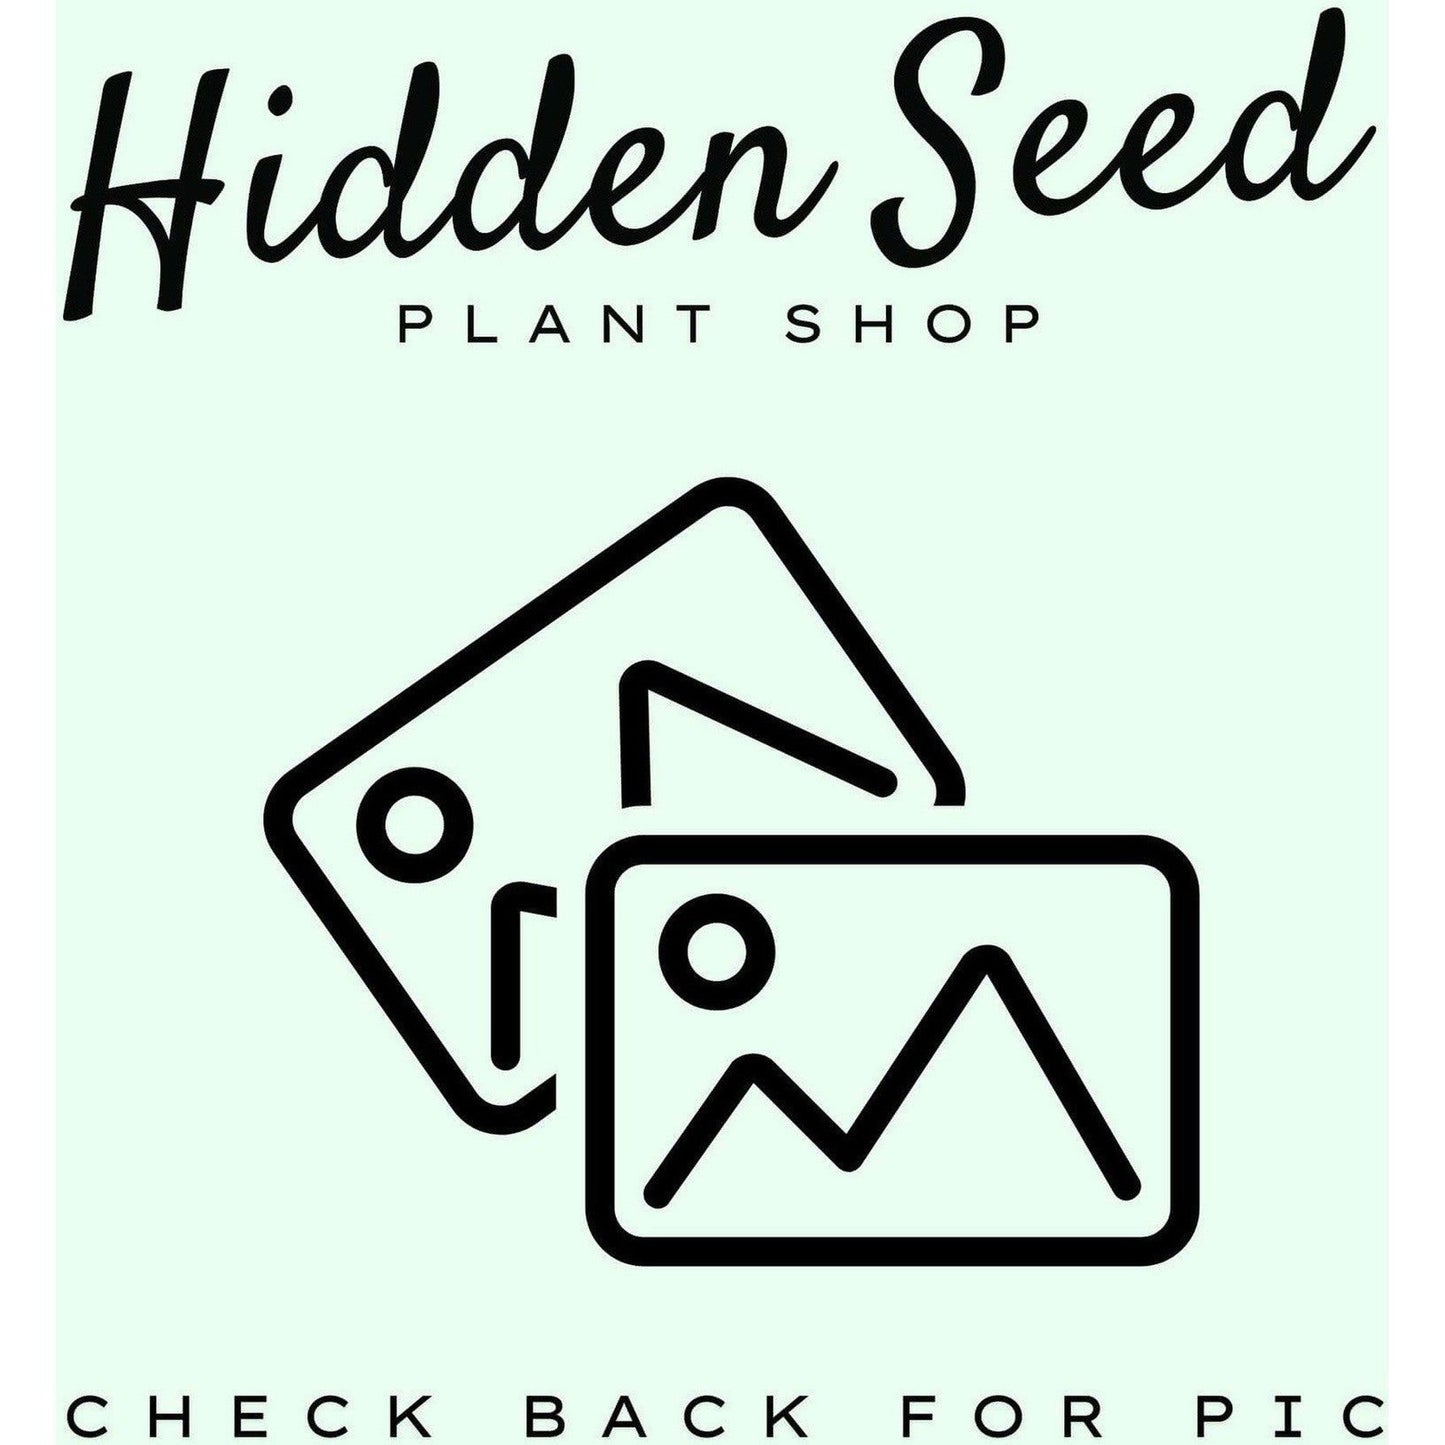 Leaf Etched Planter 6"-available at Hidden Seed Plant Shop